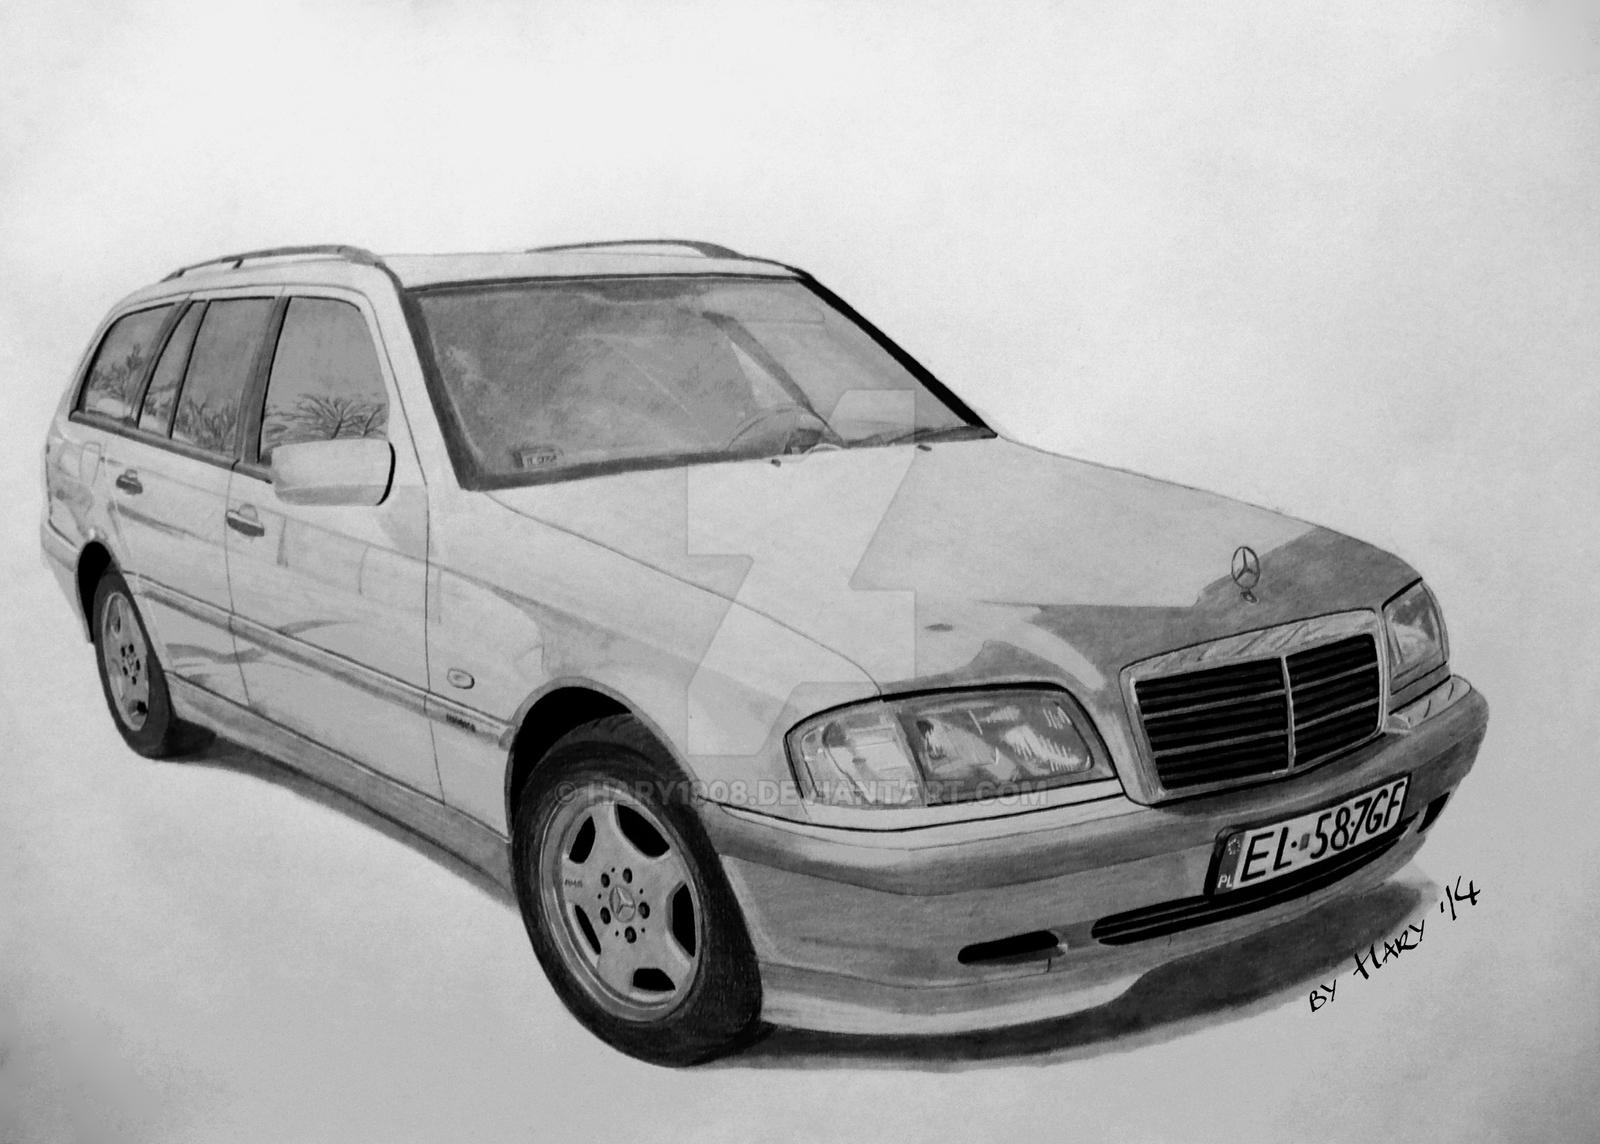 Mercedes Benz C-Class W202 Wagon Drawing by hary1908 on DeviantArt